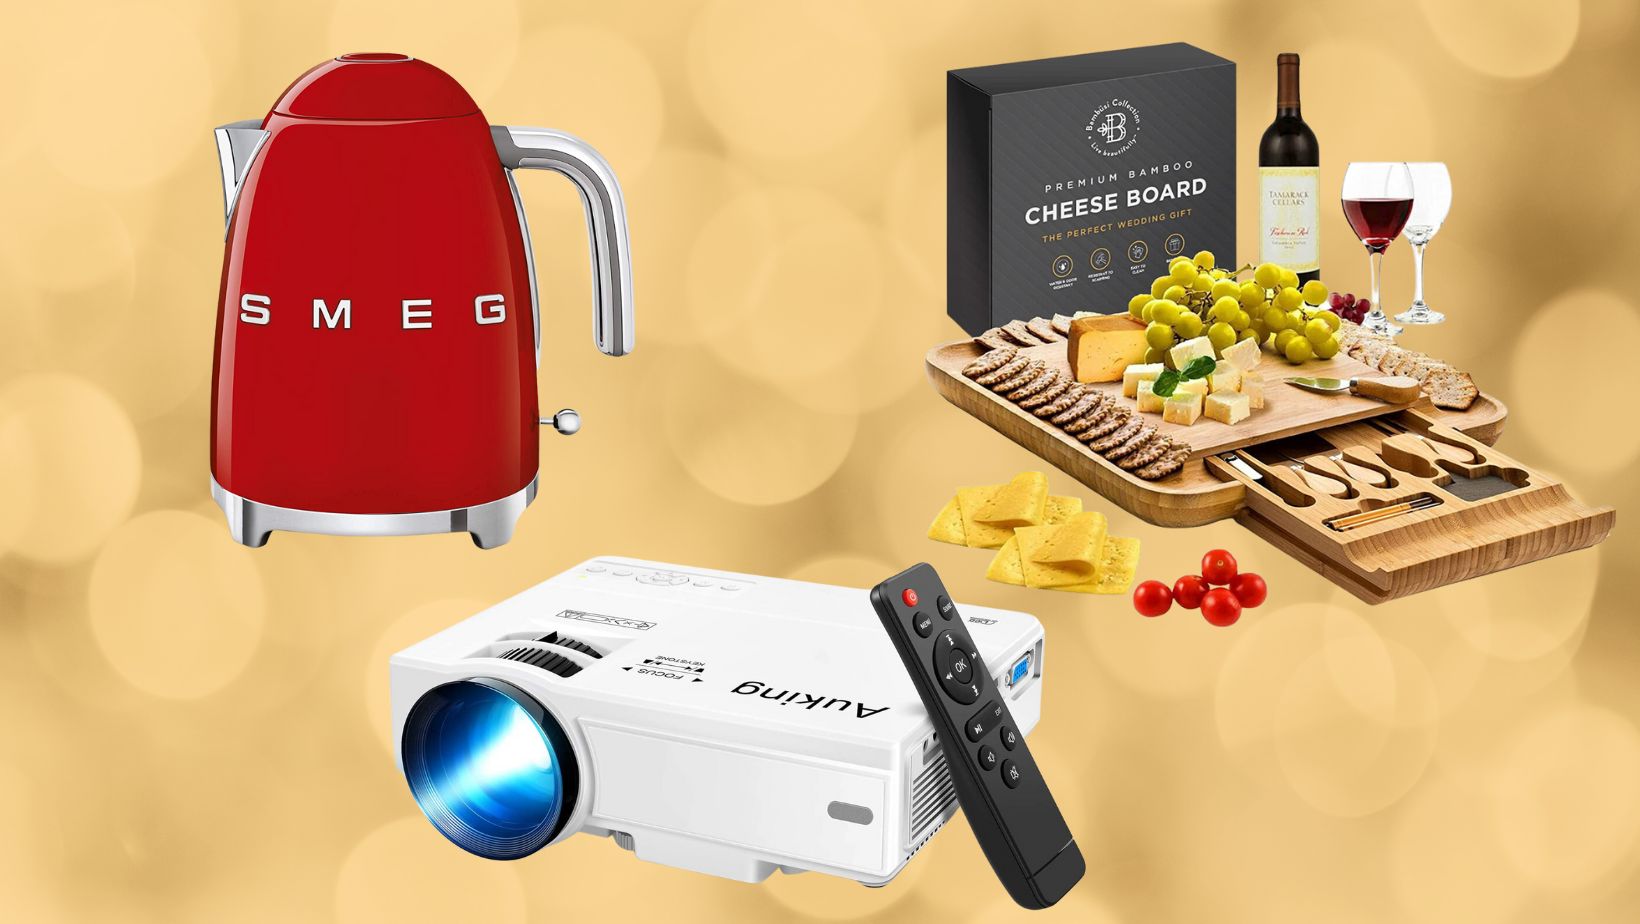 Amazon finds: Top 5 wedding gift ideas under Rs 10,000